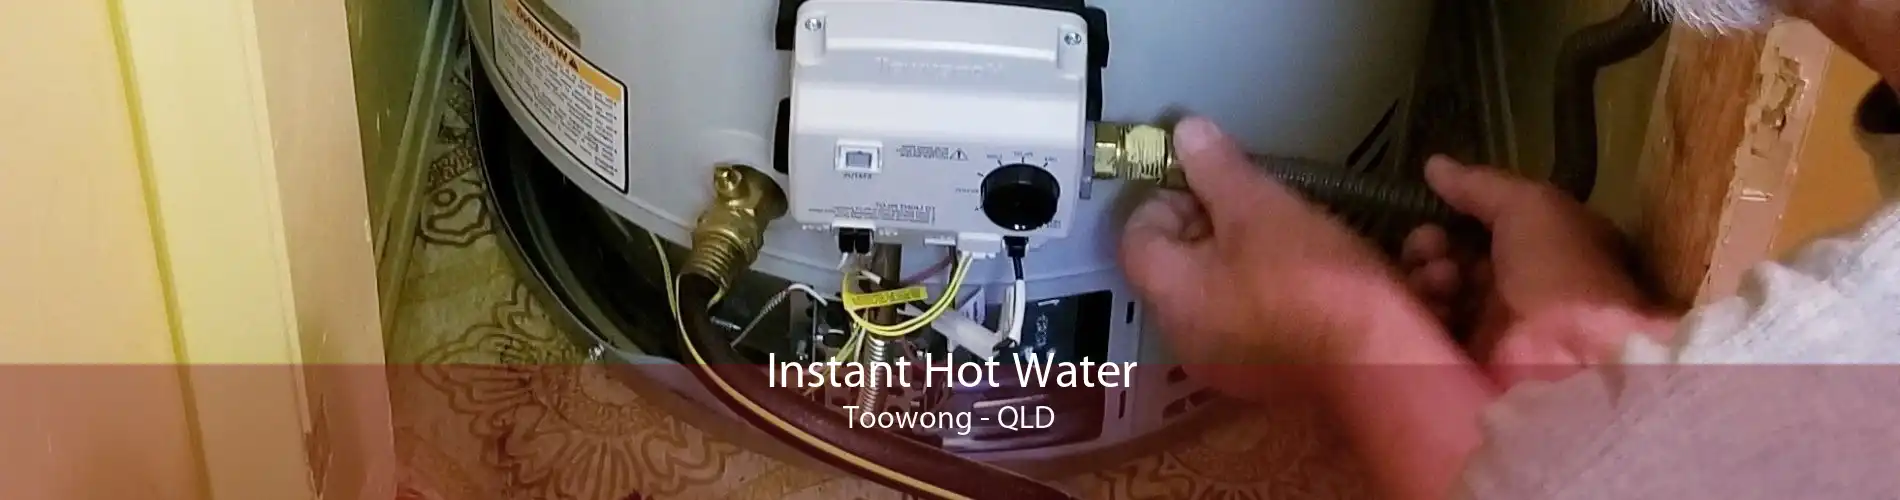 Instant Hot Water Toowong - QLD